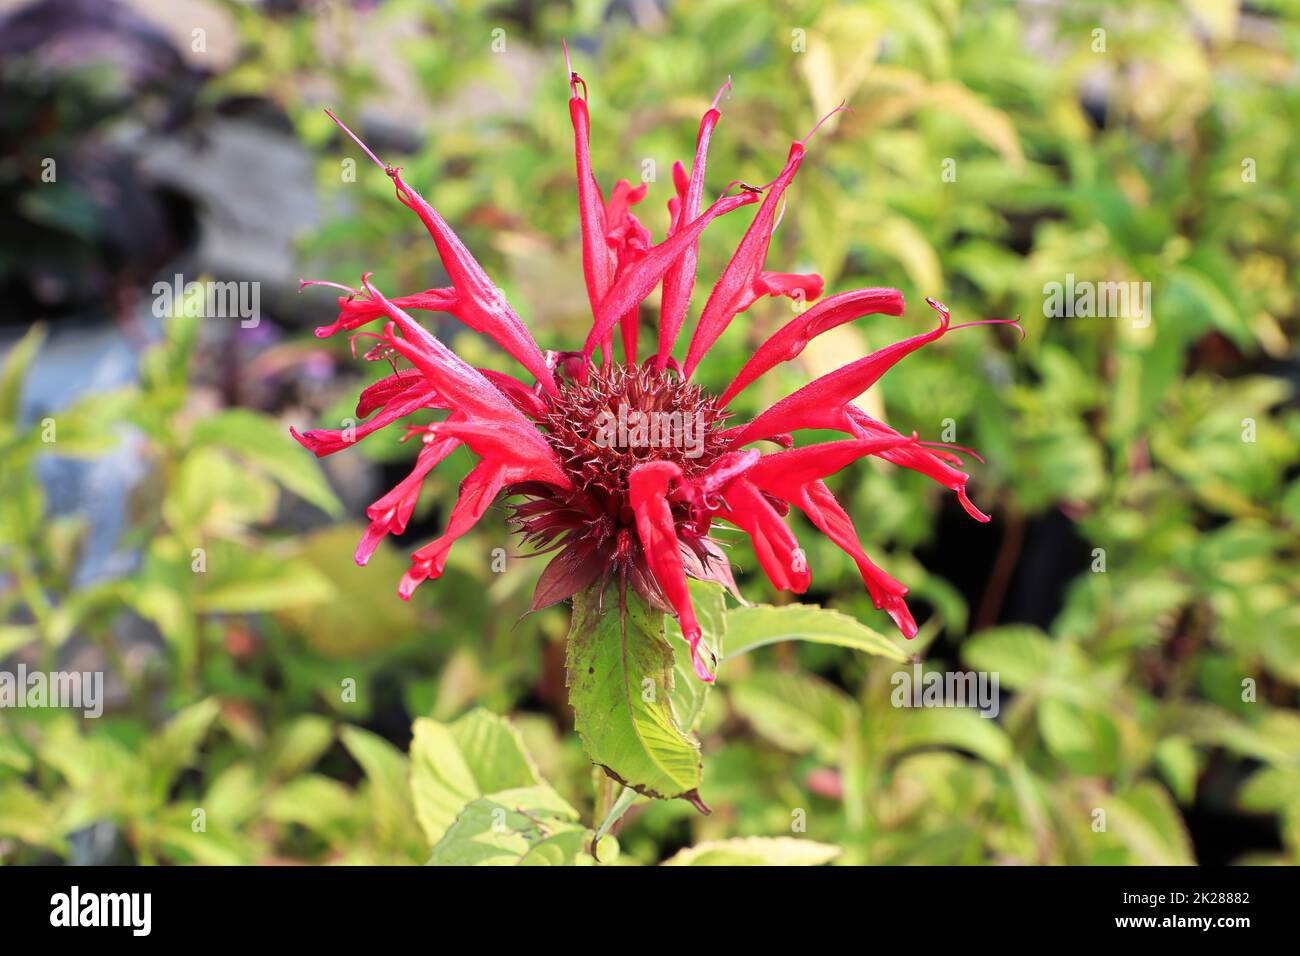 Closeup view of the red petals on a beebalm plant Stock Photo